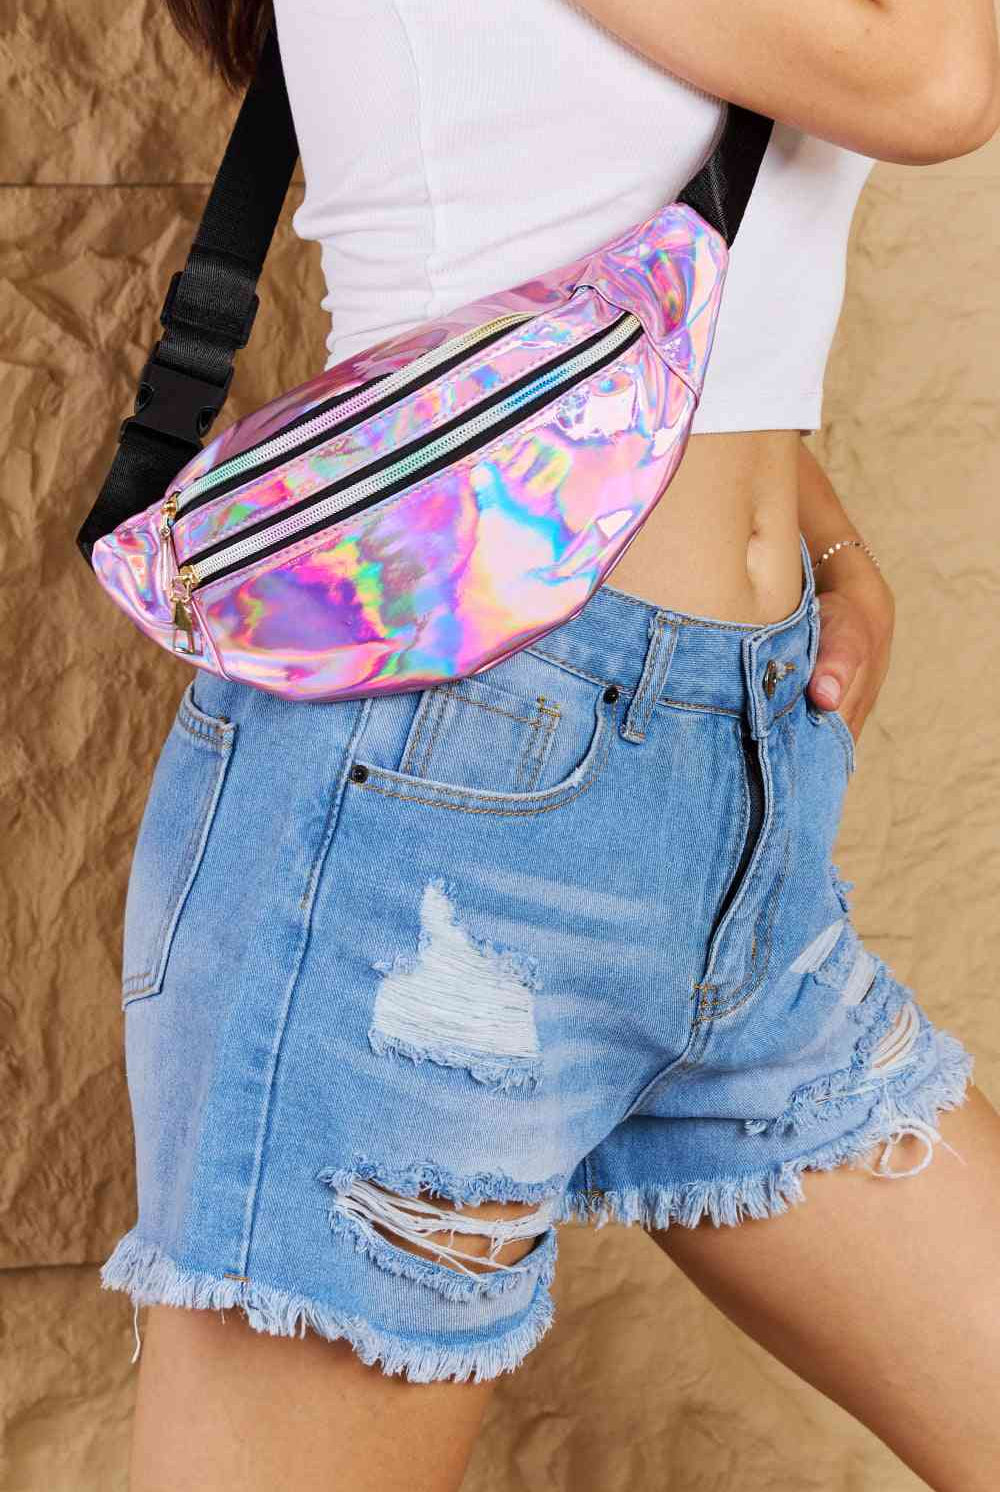 Dark Gray Fame Good Vibrations Holographic Double Zipper Fanny Pack in Hot Pink Clothing